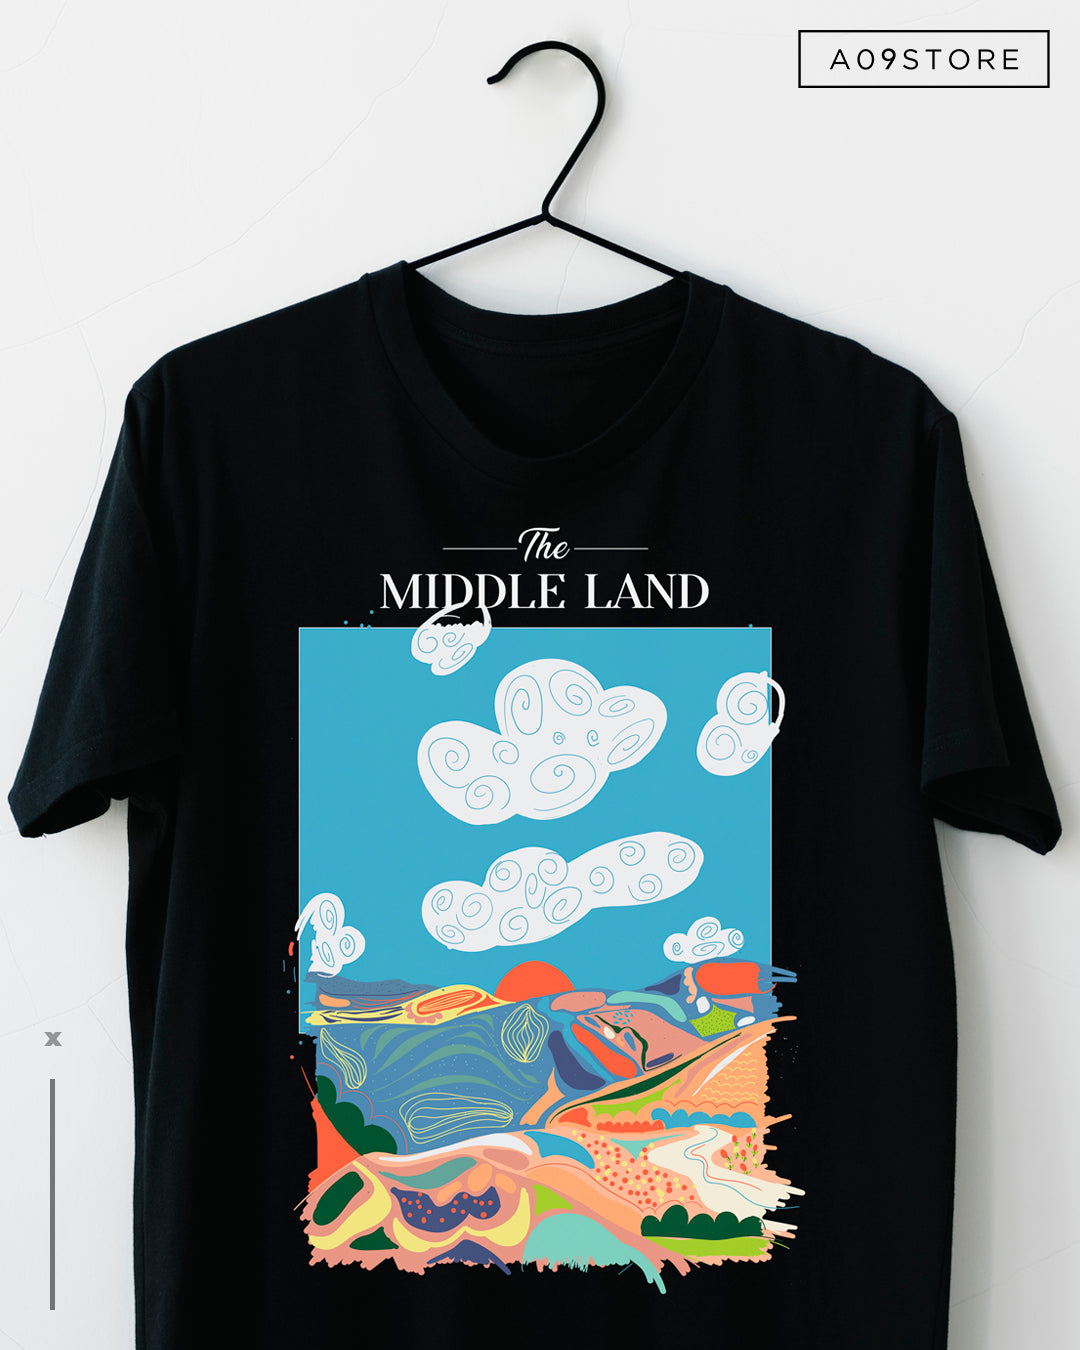 Travelher | Middle Land - A09STORE